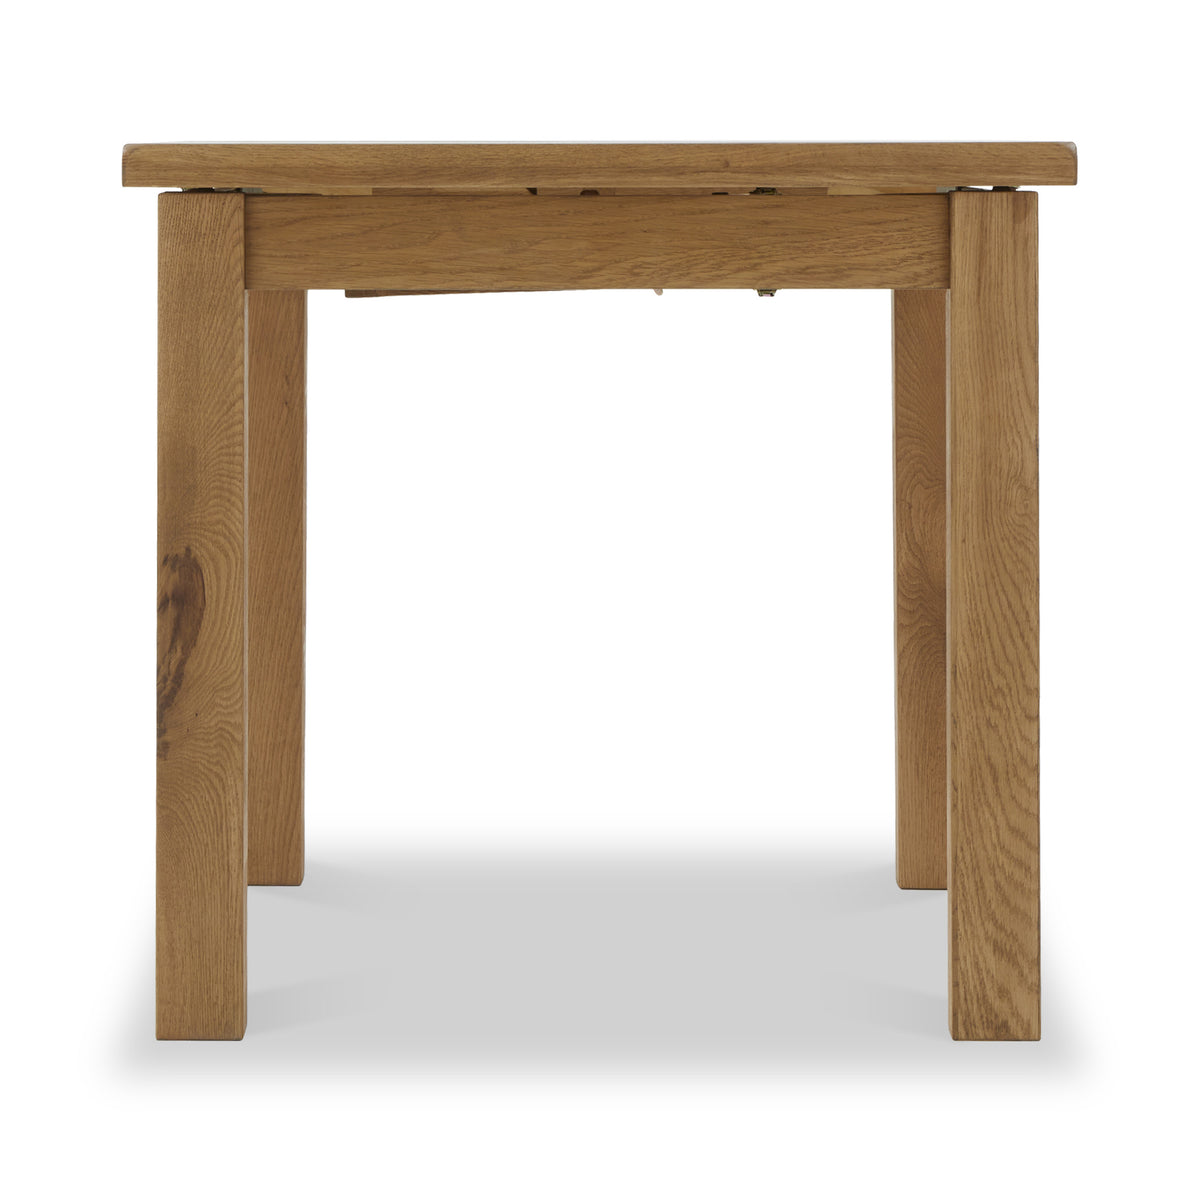 Broadway Oak Compact Butterfly Extending Dining Table 